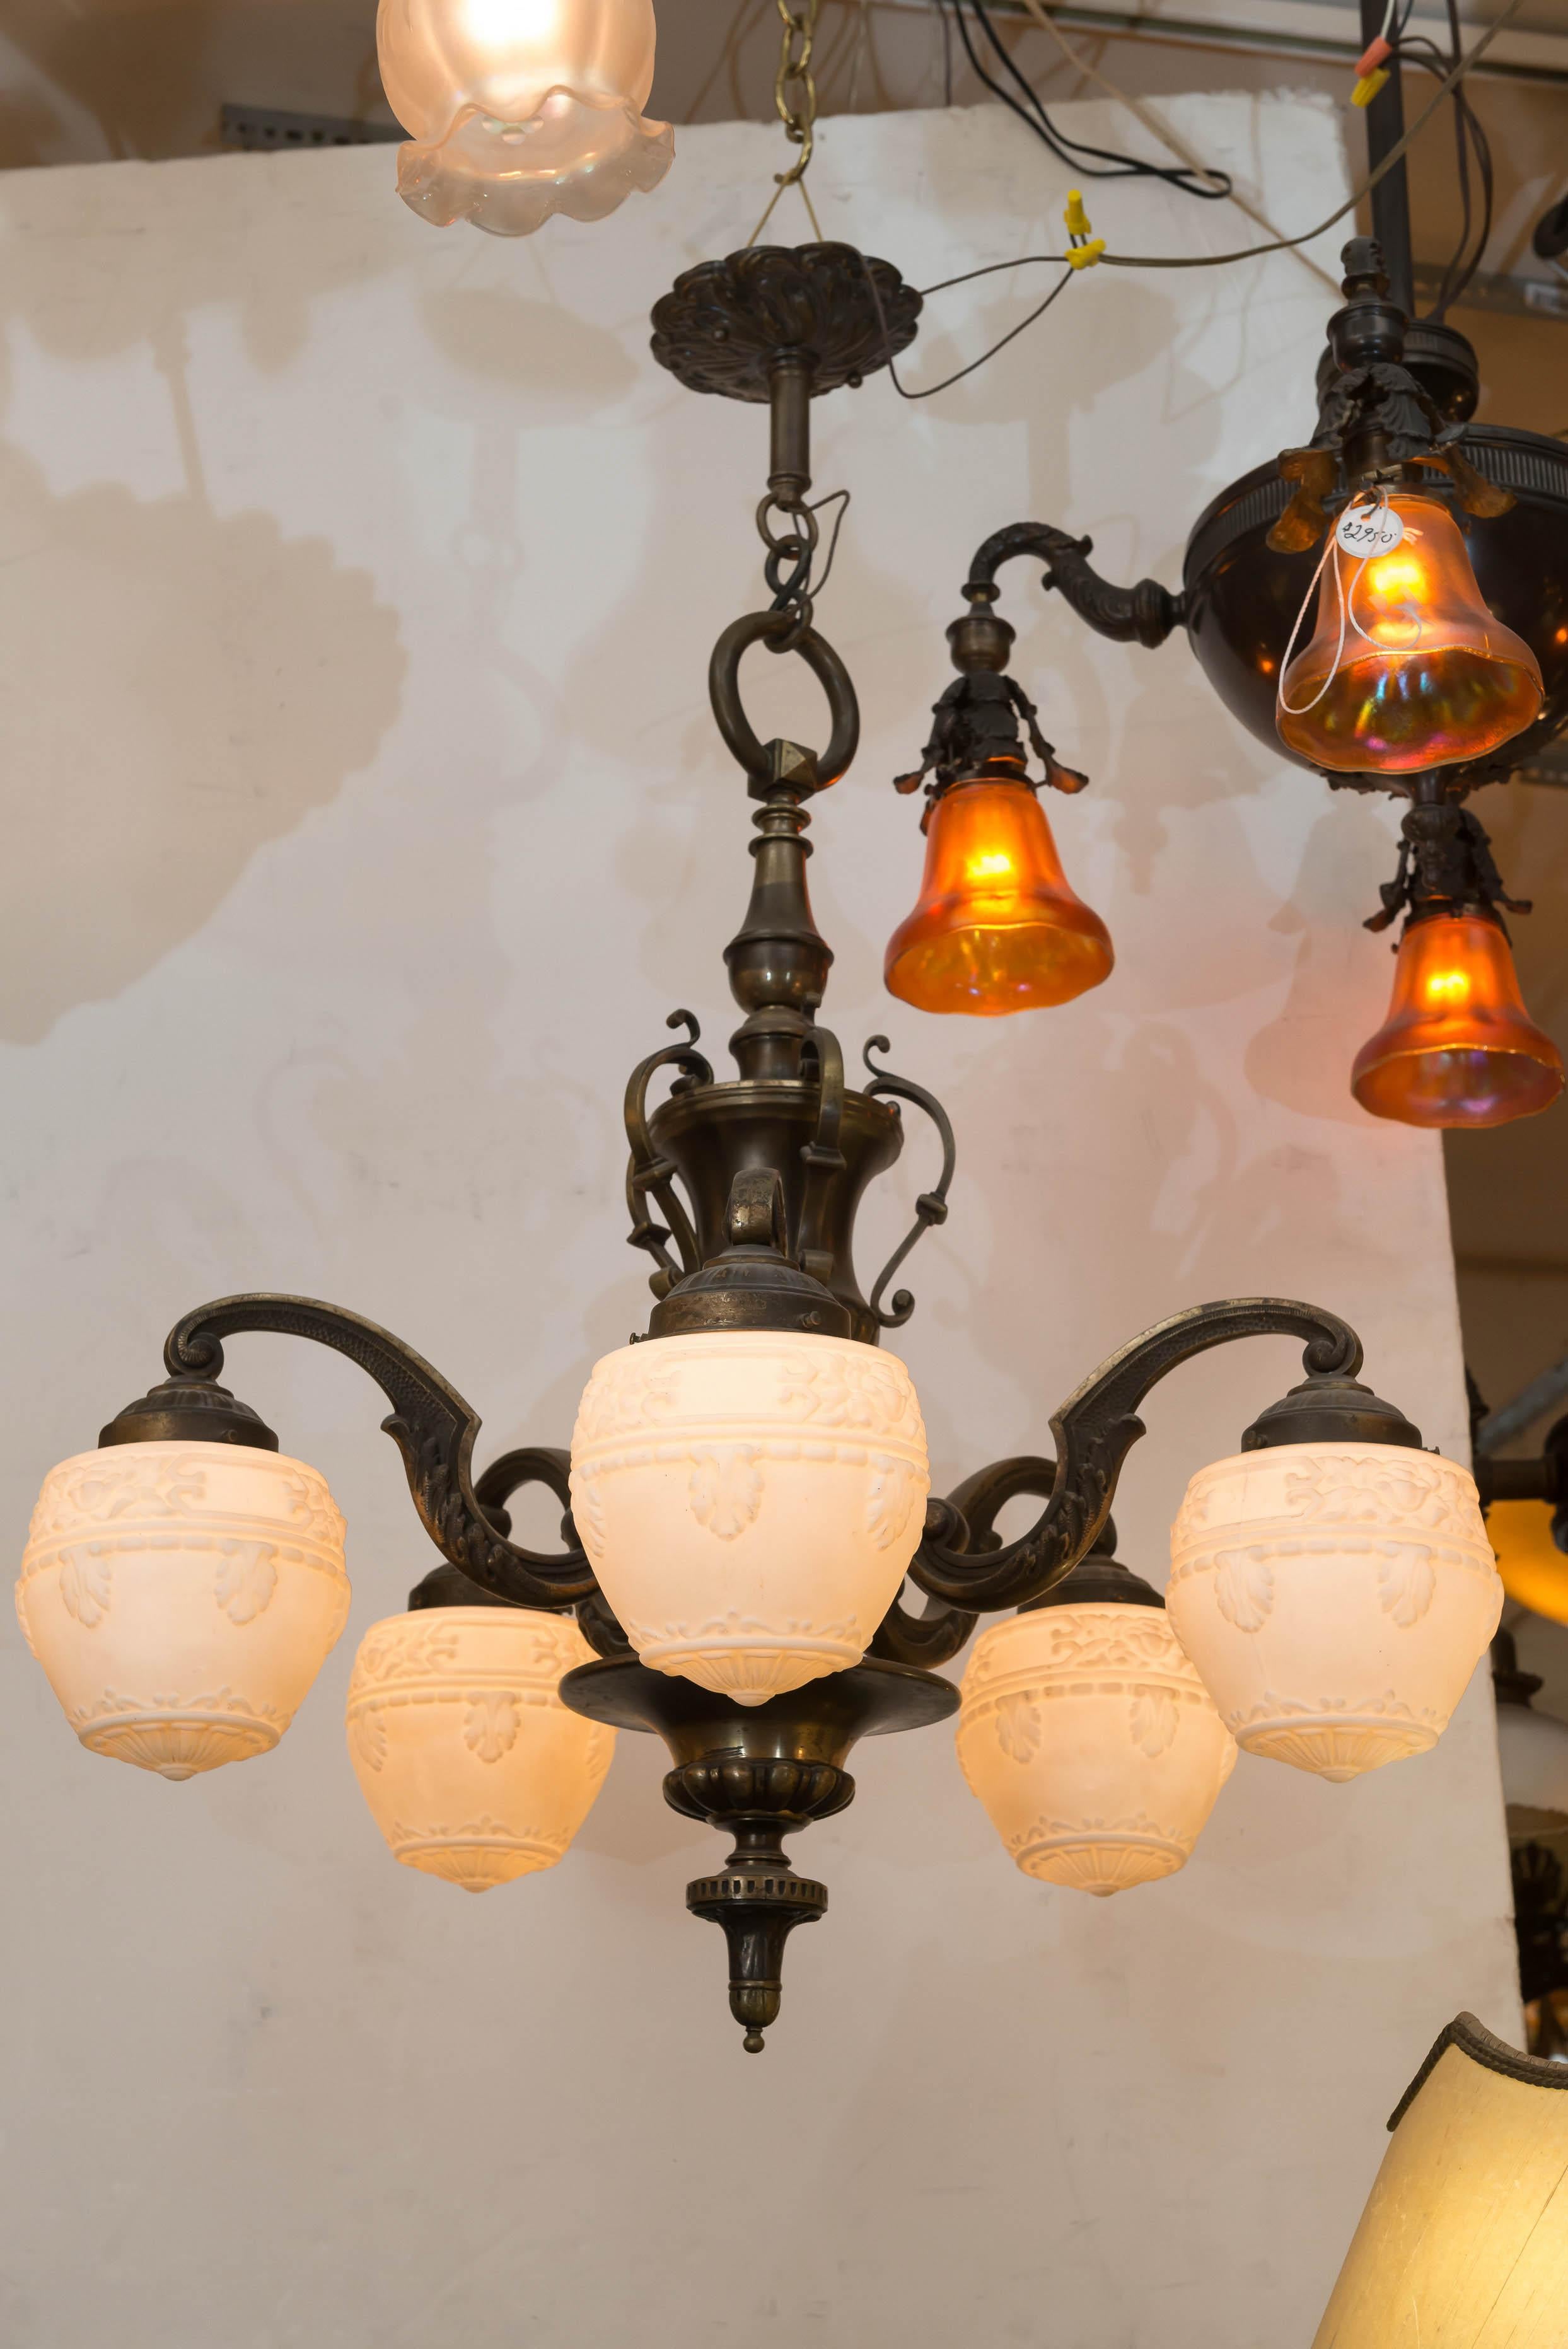   Not much more that we can say here that our title has said. This nice period chunky bronze chandelier has 5 of the most popular choice glass shades, white acorns shades. Acorn is the lighting dealer's name for shades of this style. All is period